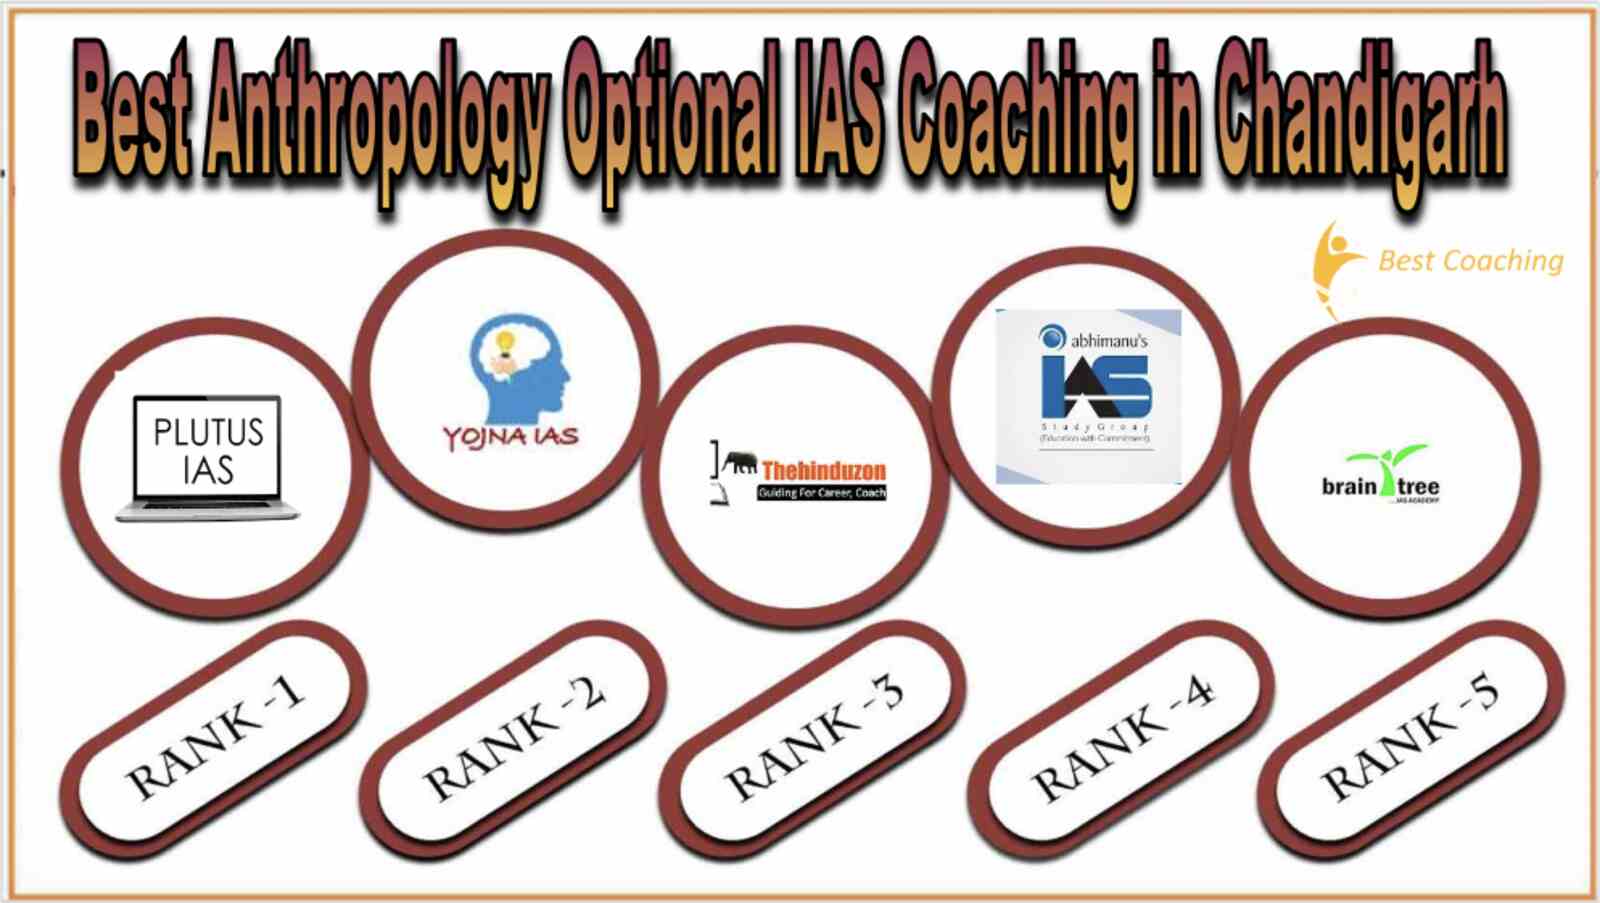 Best Anthropology Optional Coaching in India